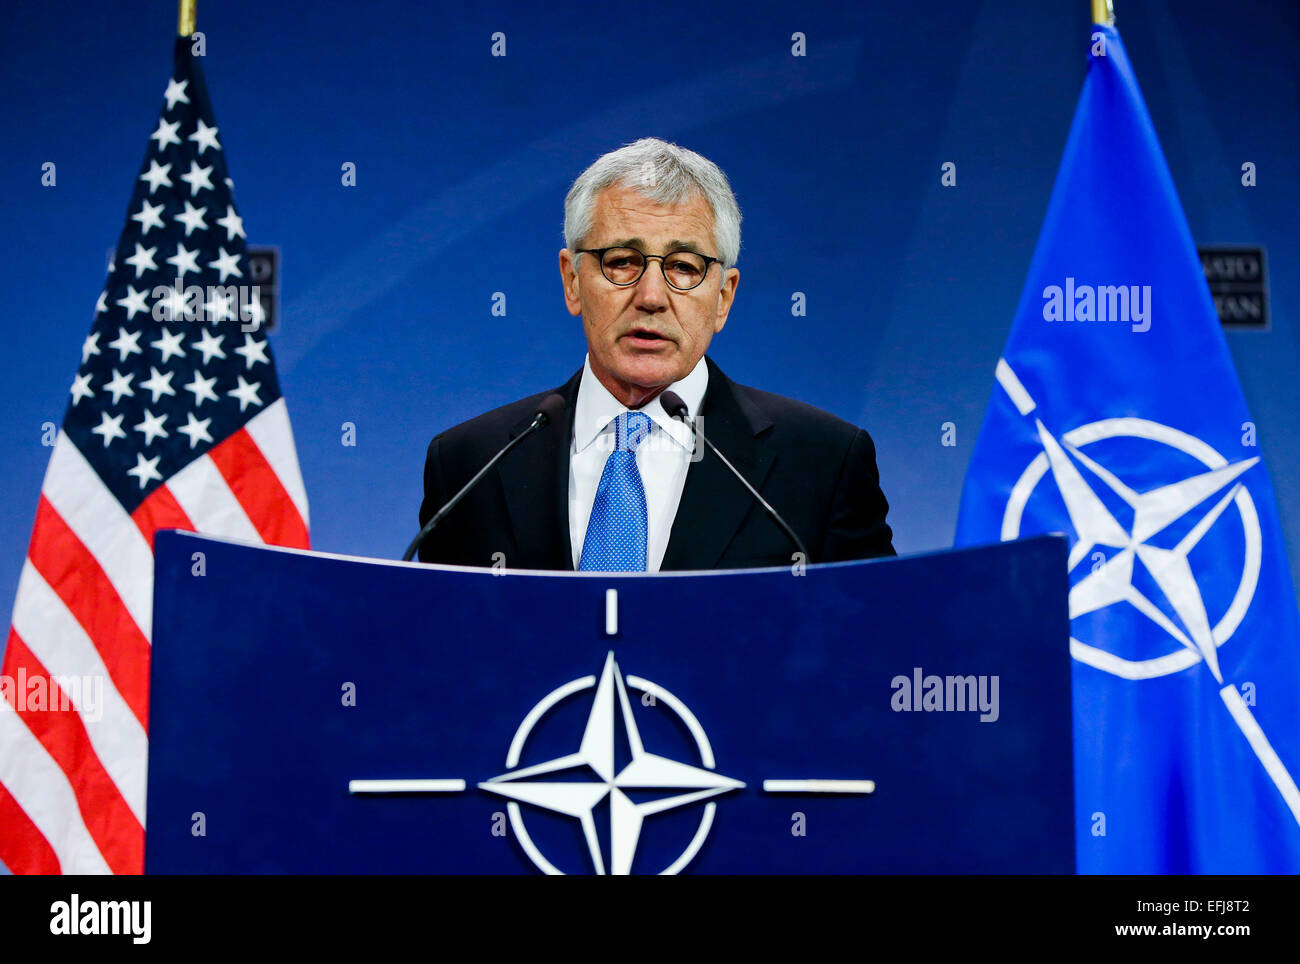 (150205) -- BRUSSELS, Feb. 5, 2015 (xinhua) -- US Defense Secretary Chuck Hagel speaks during a press conference at the NATO headquarters in Brussels, capital of Belgium, Feb. 5, 2014. NATO Defense Ministers gathered here on Thursday to discuss the implementation of the Readiness Action Plan and the Ukraine crisis. (Xinhua/Zhou Lei) Stock Photo